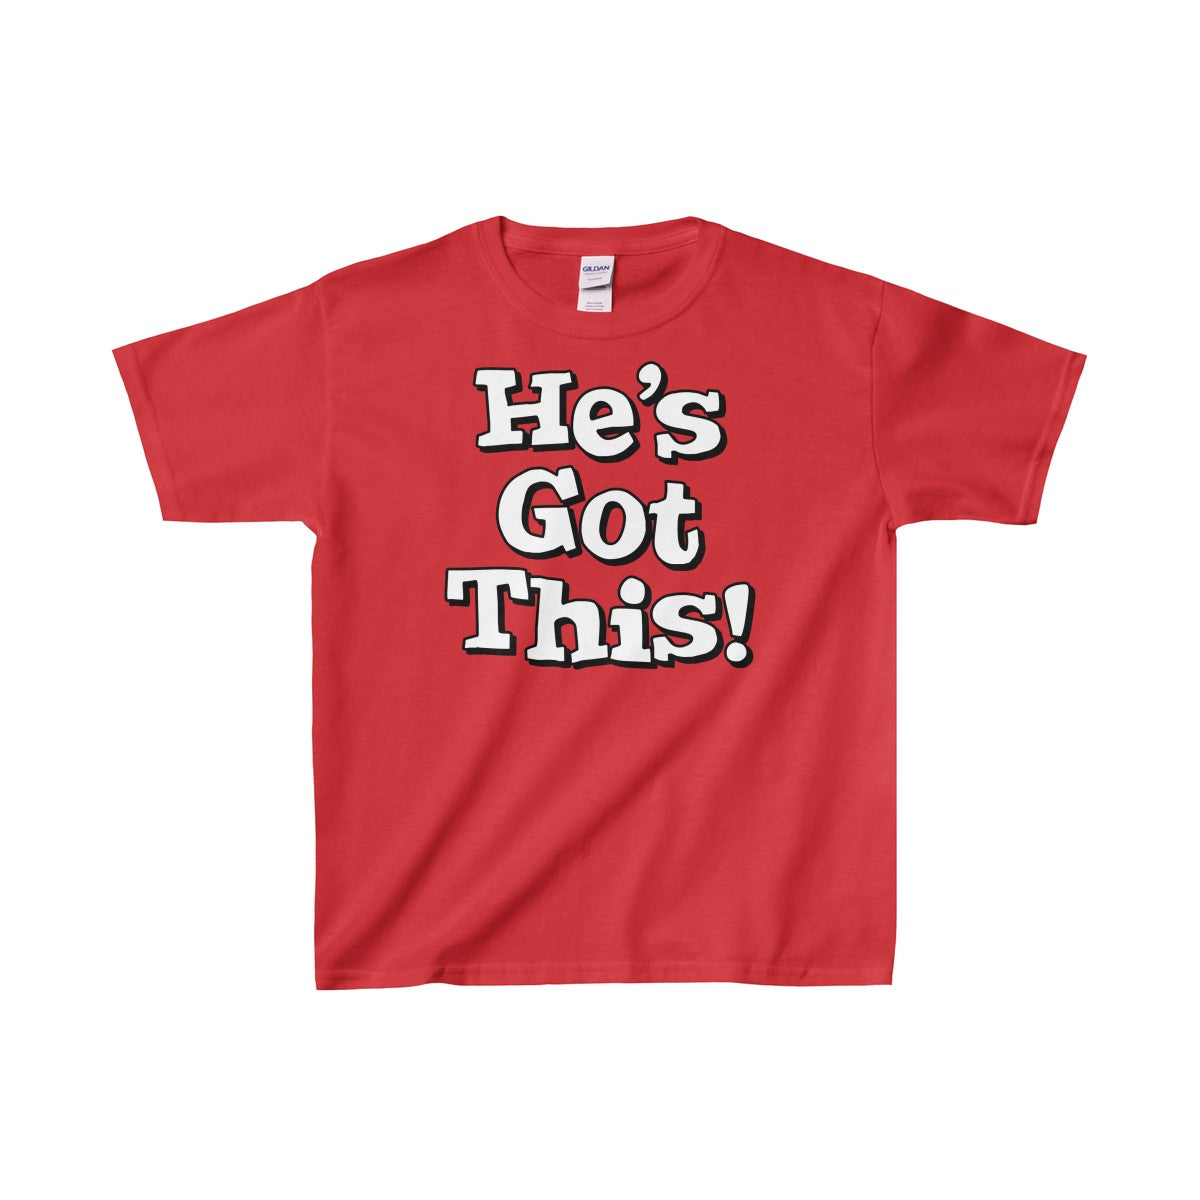 He's Got This! Gildan® Heavy Cotton™ Youth T-Shirt-Kids clothes-PureDesignTees